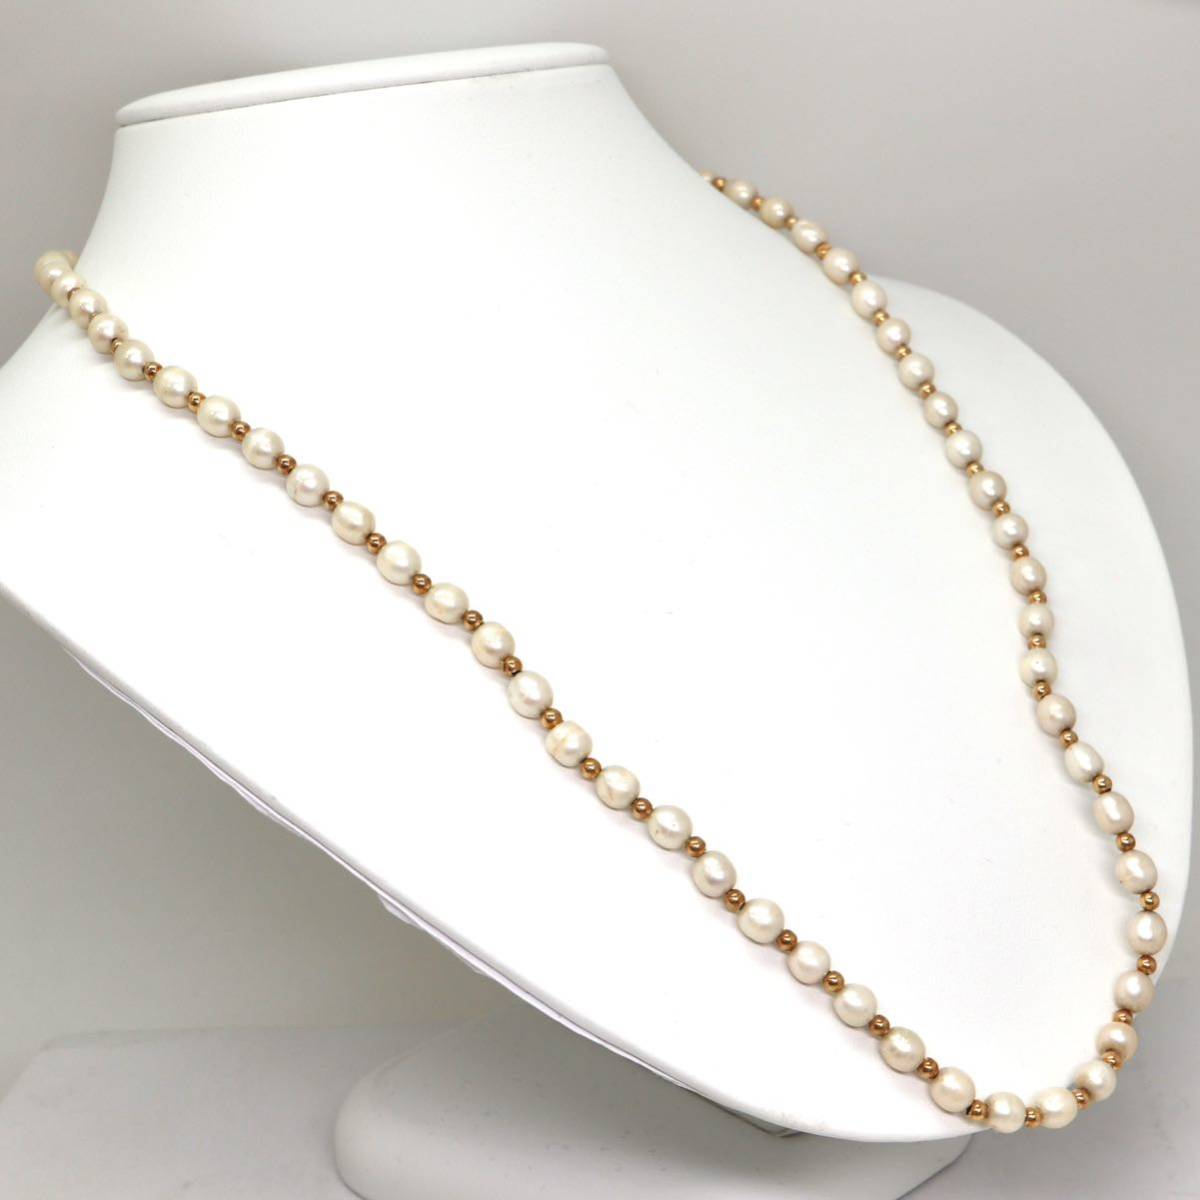 ◆K18 本真珠ロングネックレス/38◆M 約20.7g 約61.5cm pearl パール jewelry necklace ジュエリー DH0/DI0_画像3